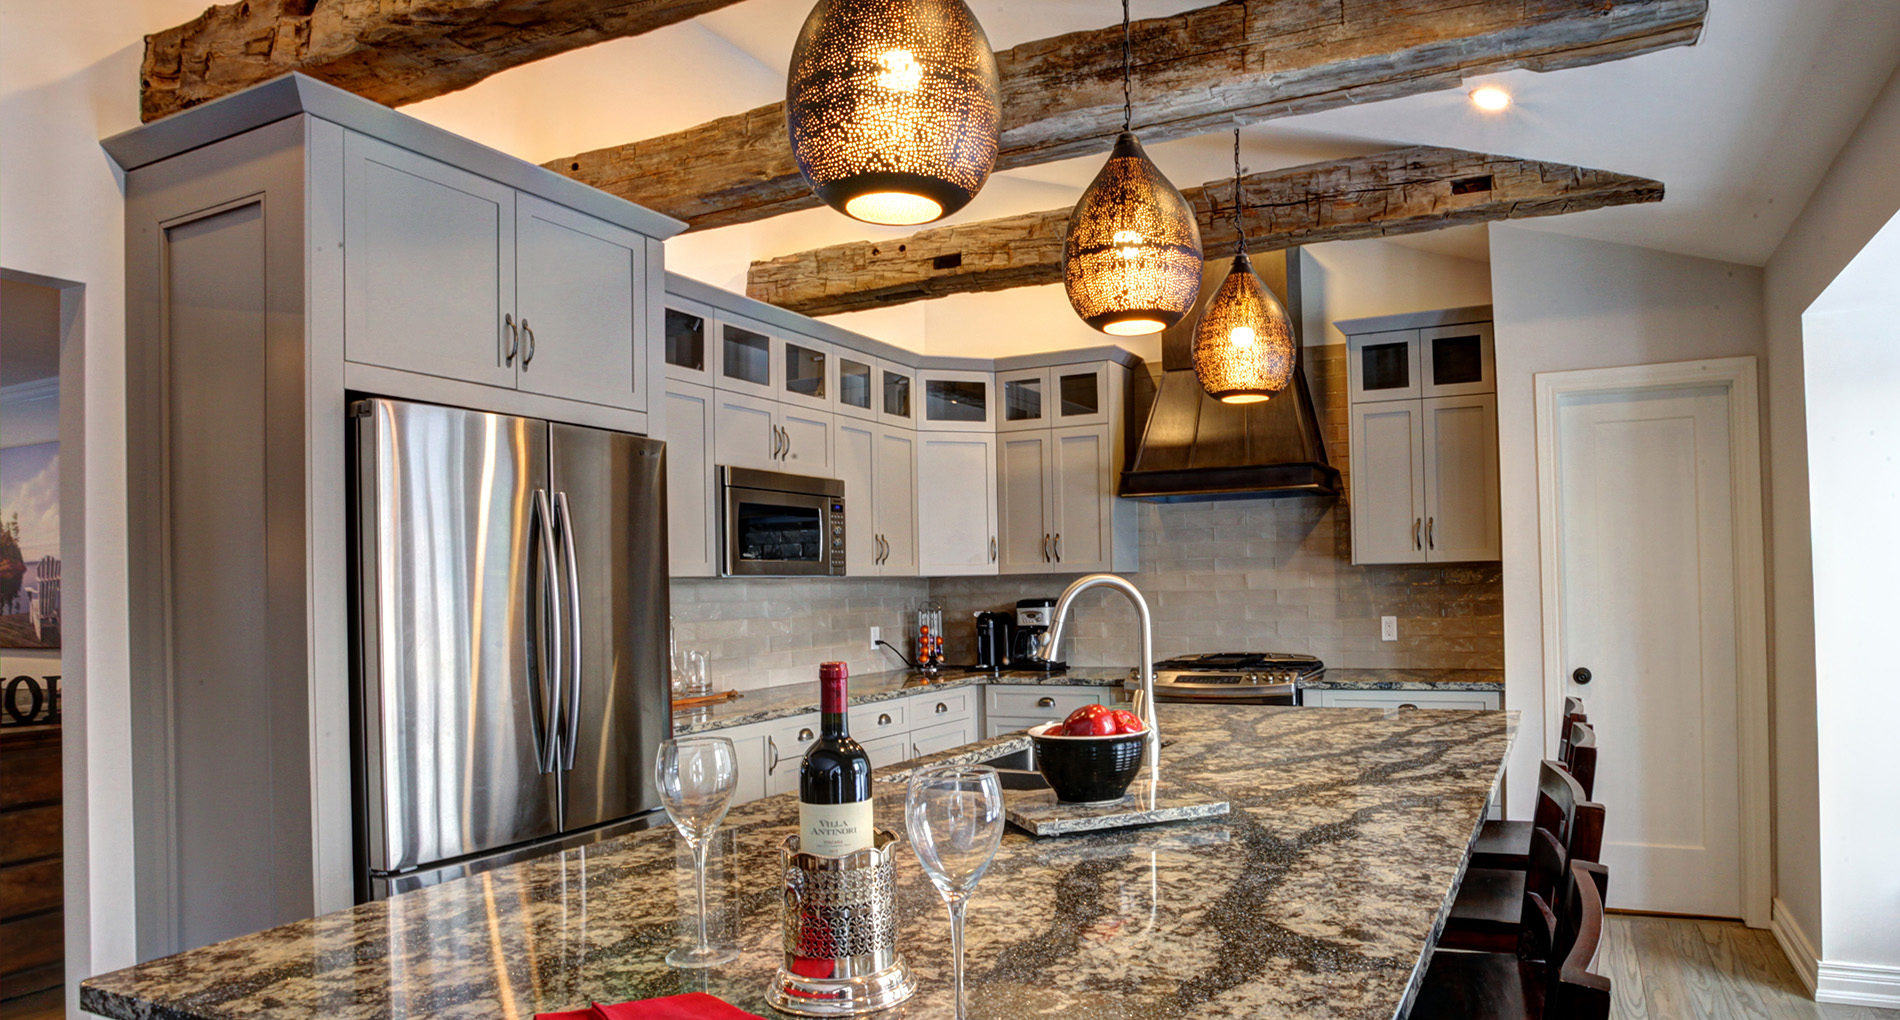  Kitchen Renovations Design in Barrie Alair Homes Barrie 